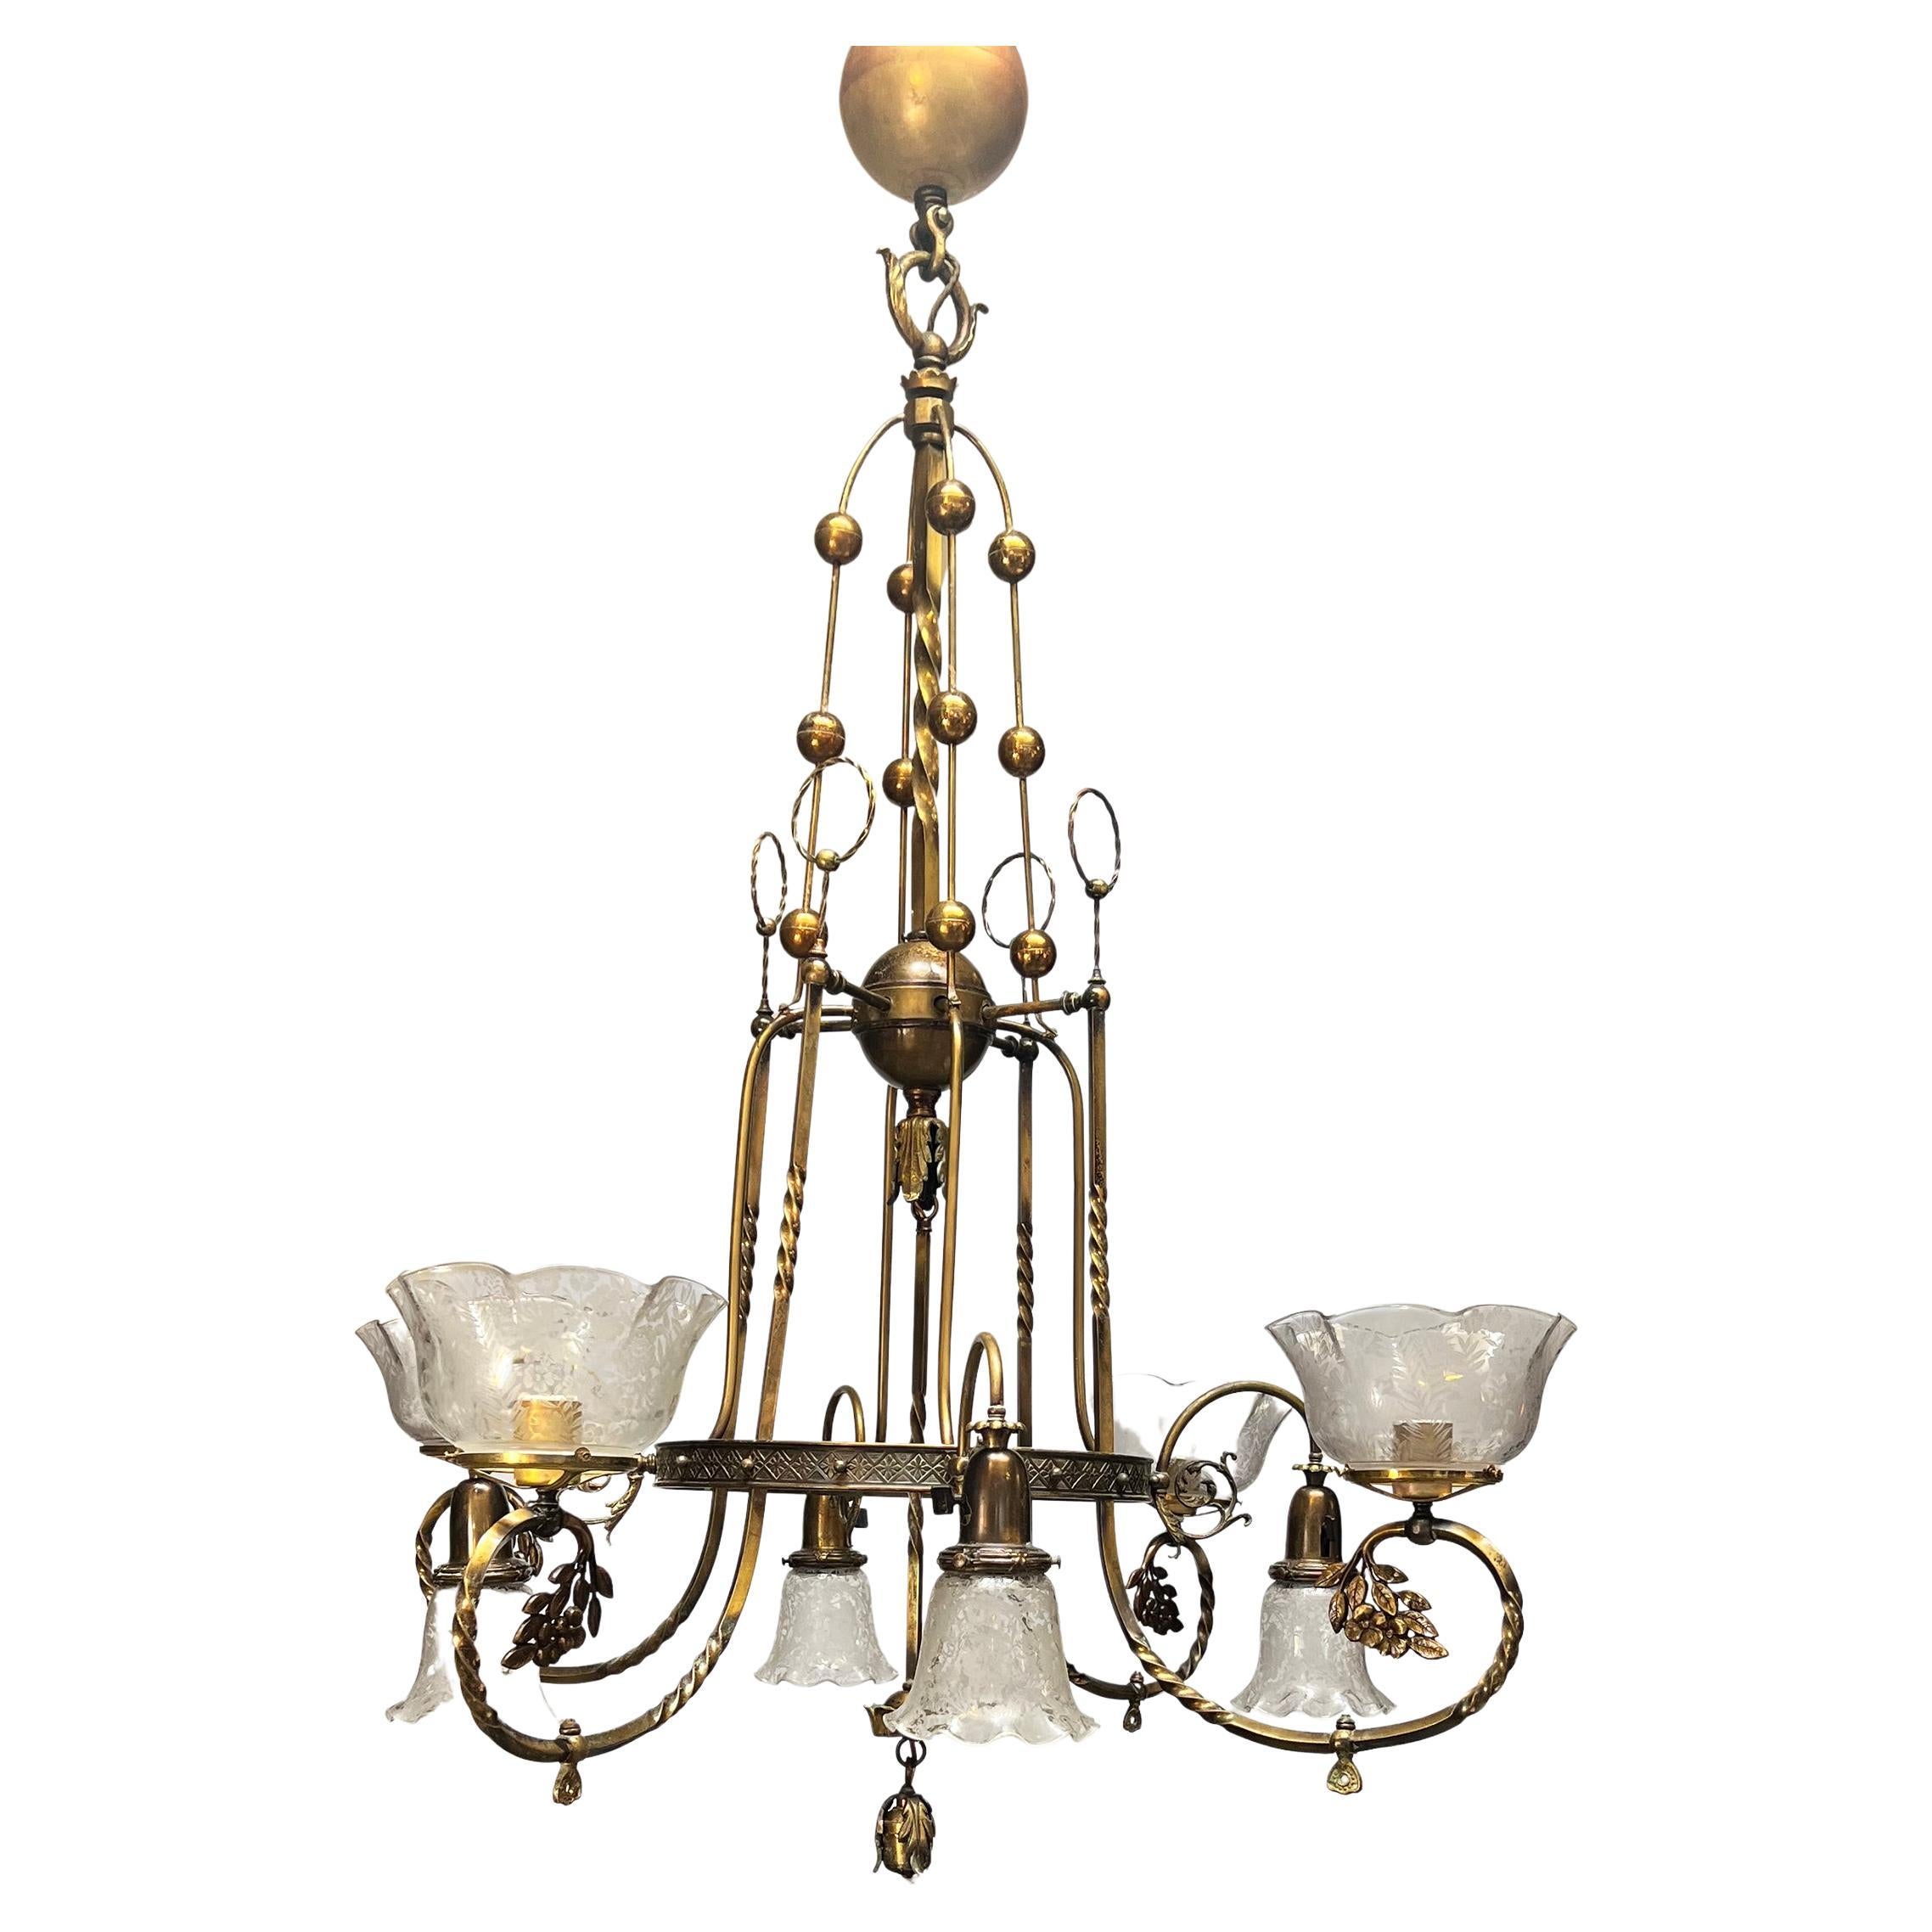 Large, Amazing, Converted Gas to Electric Brass Chandelier